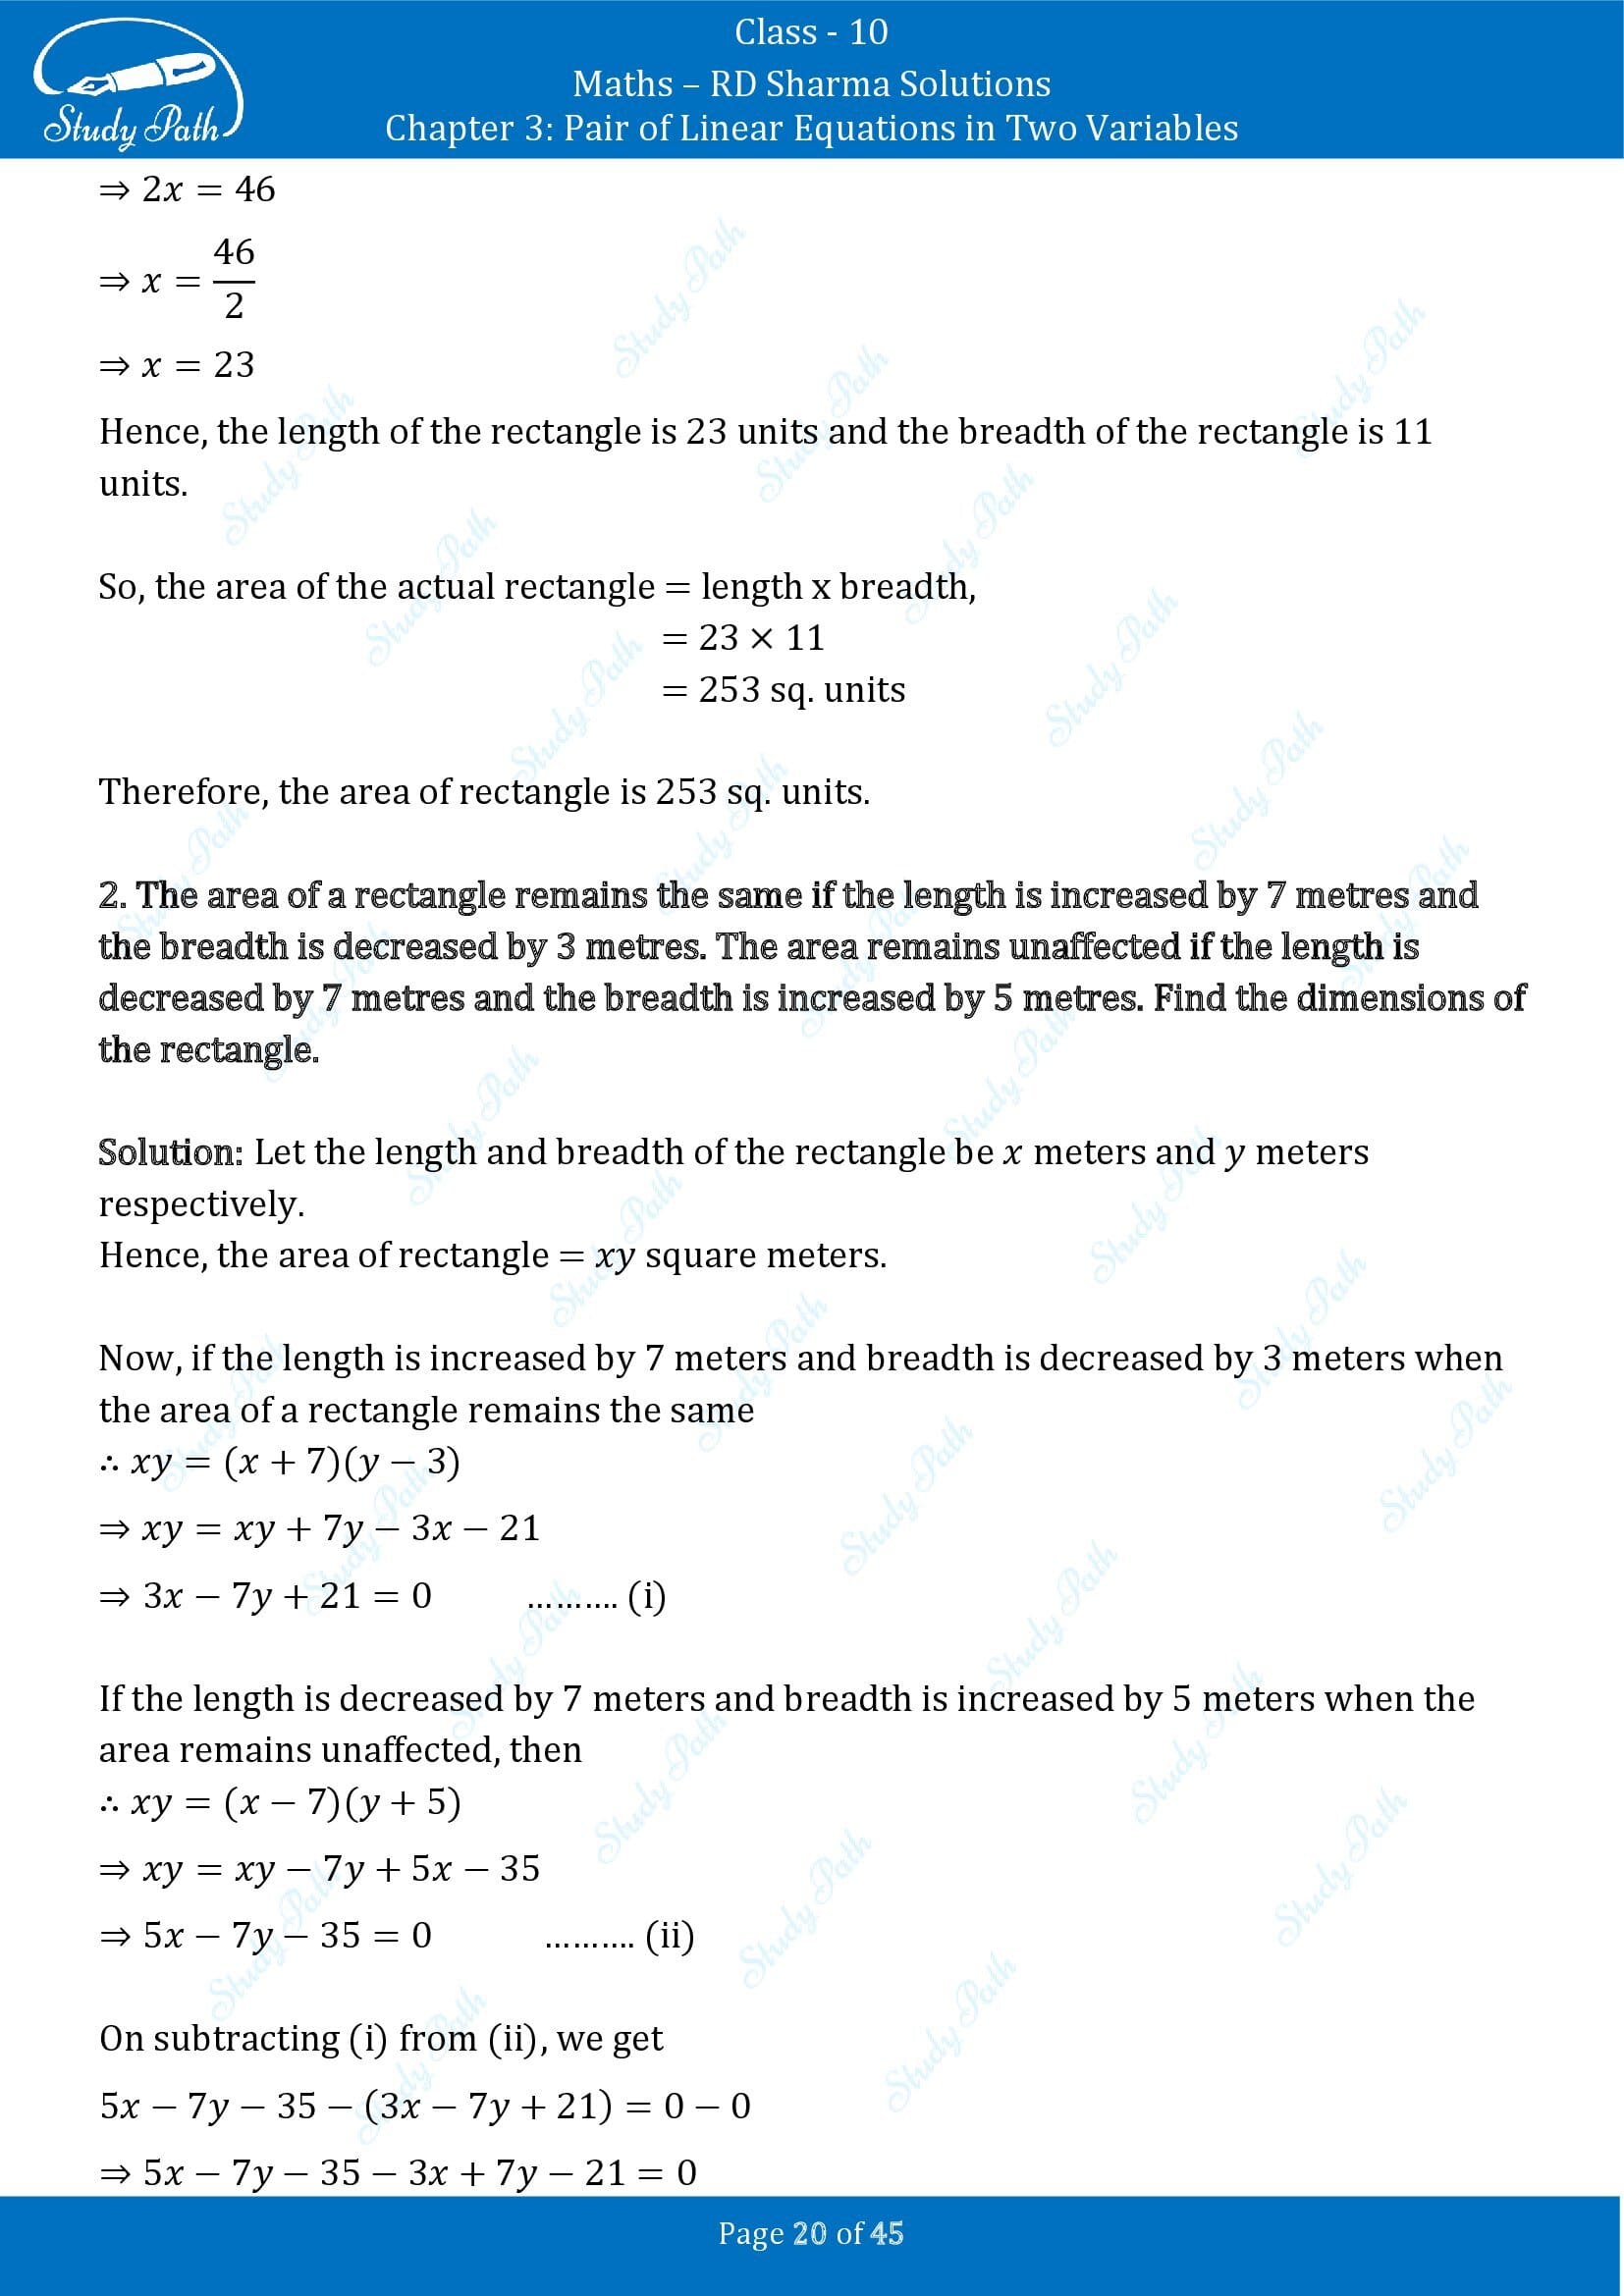 RD Sharma Solutions Class 10 Chapter 3 Pair of Linear Equations in Two Variables Exercise 3.11 00020